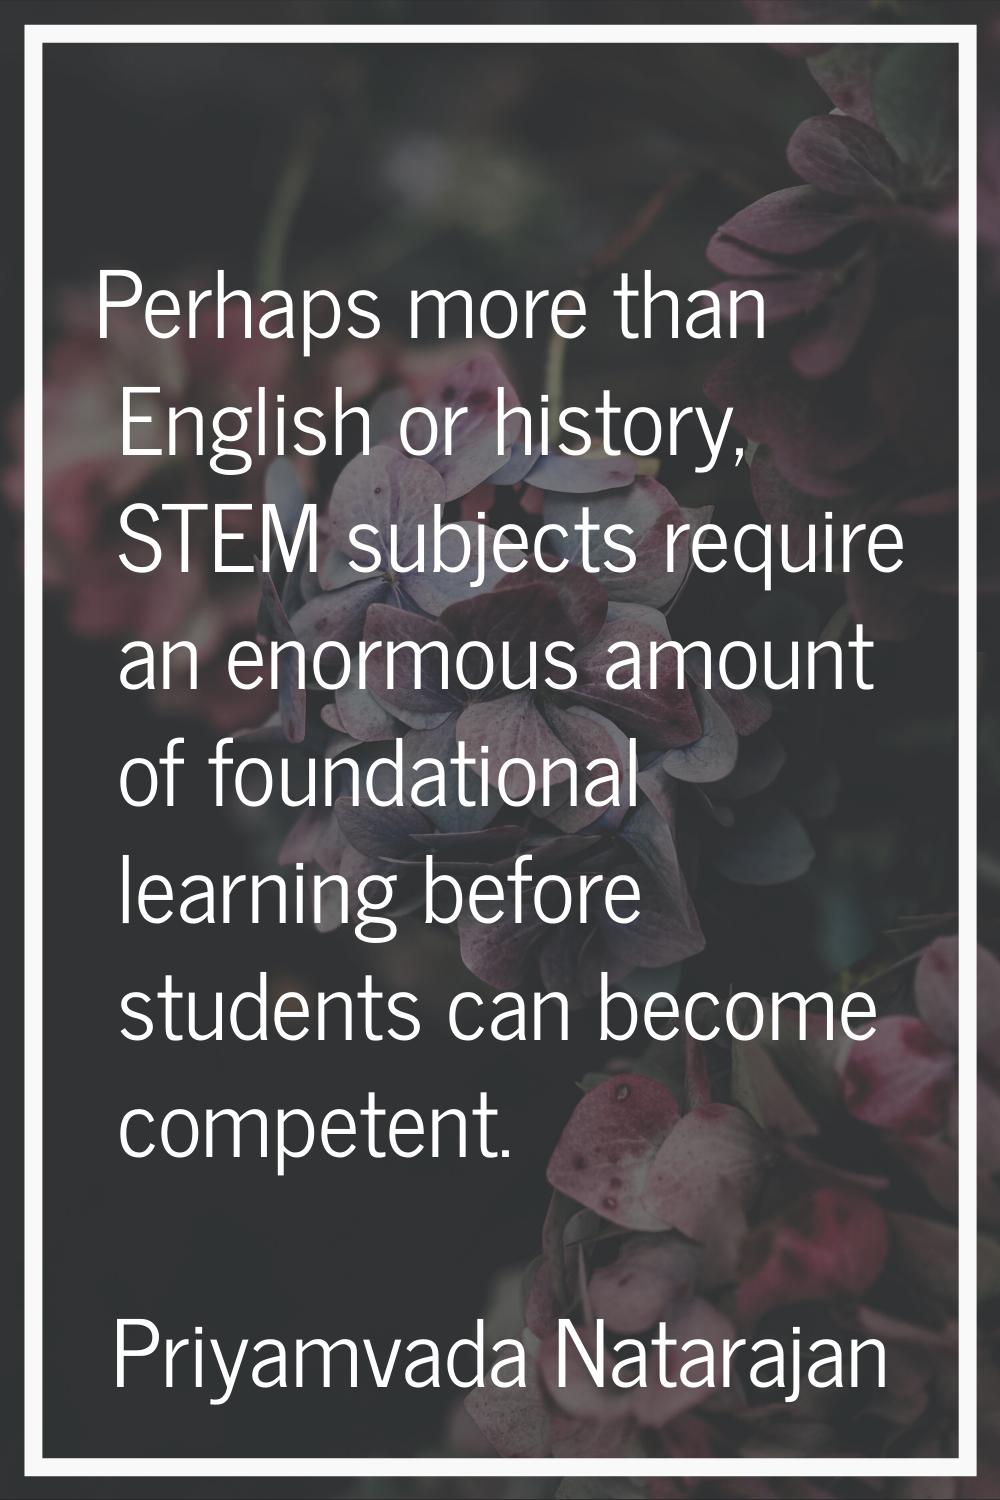 Perhaps more than English or history, STEM subjects require an enormous amount of foundational lear